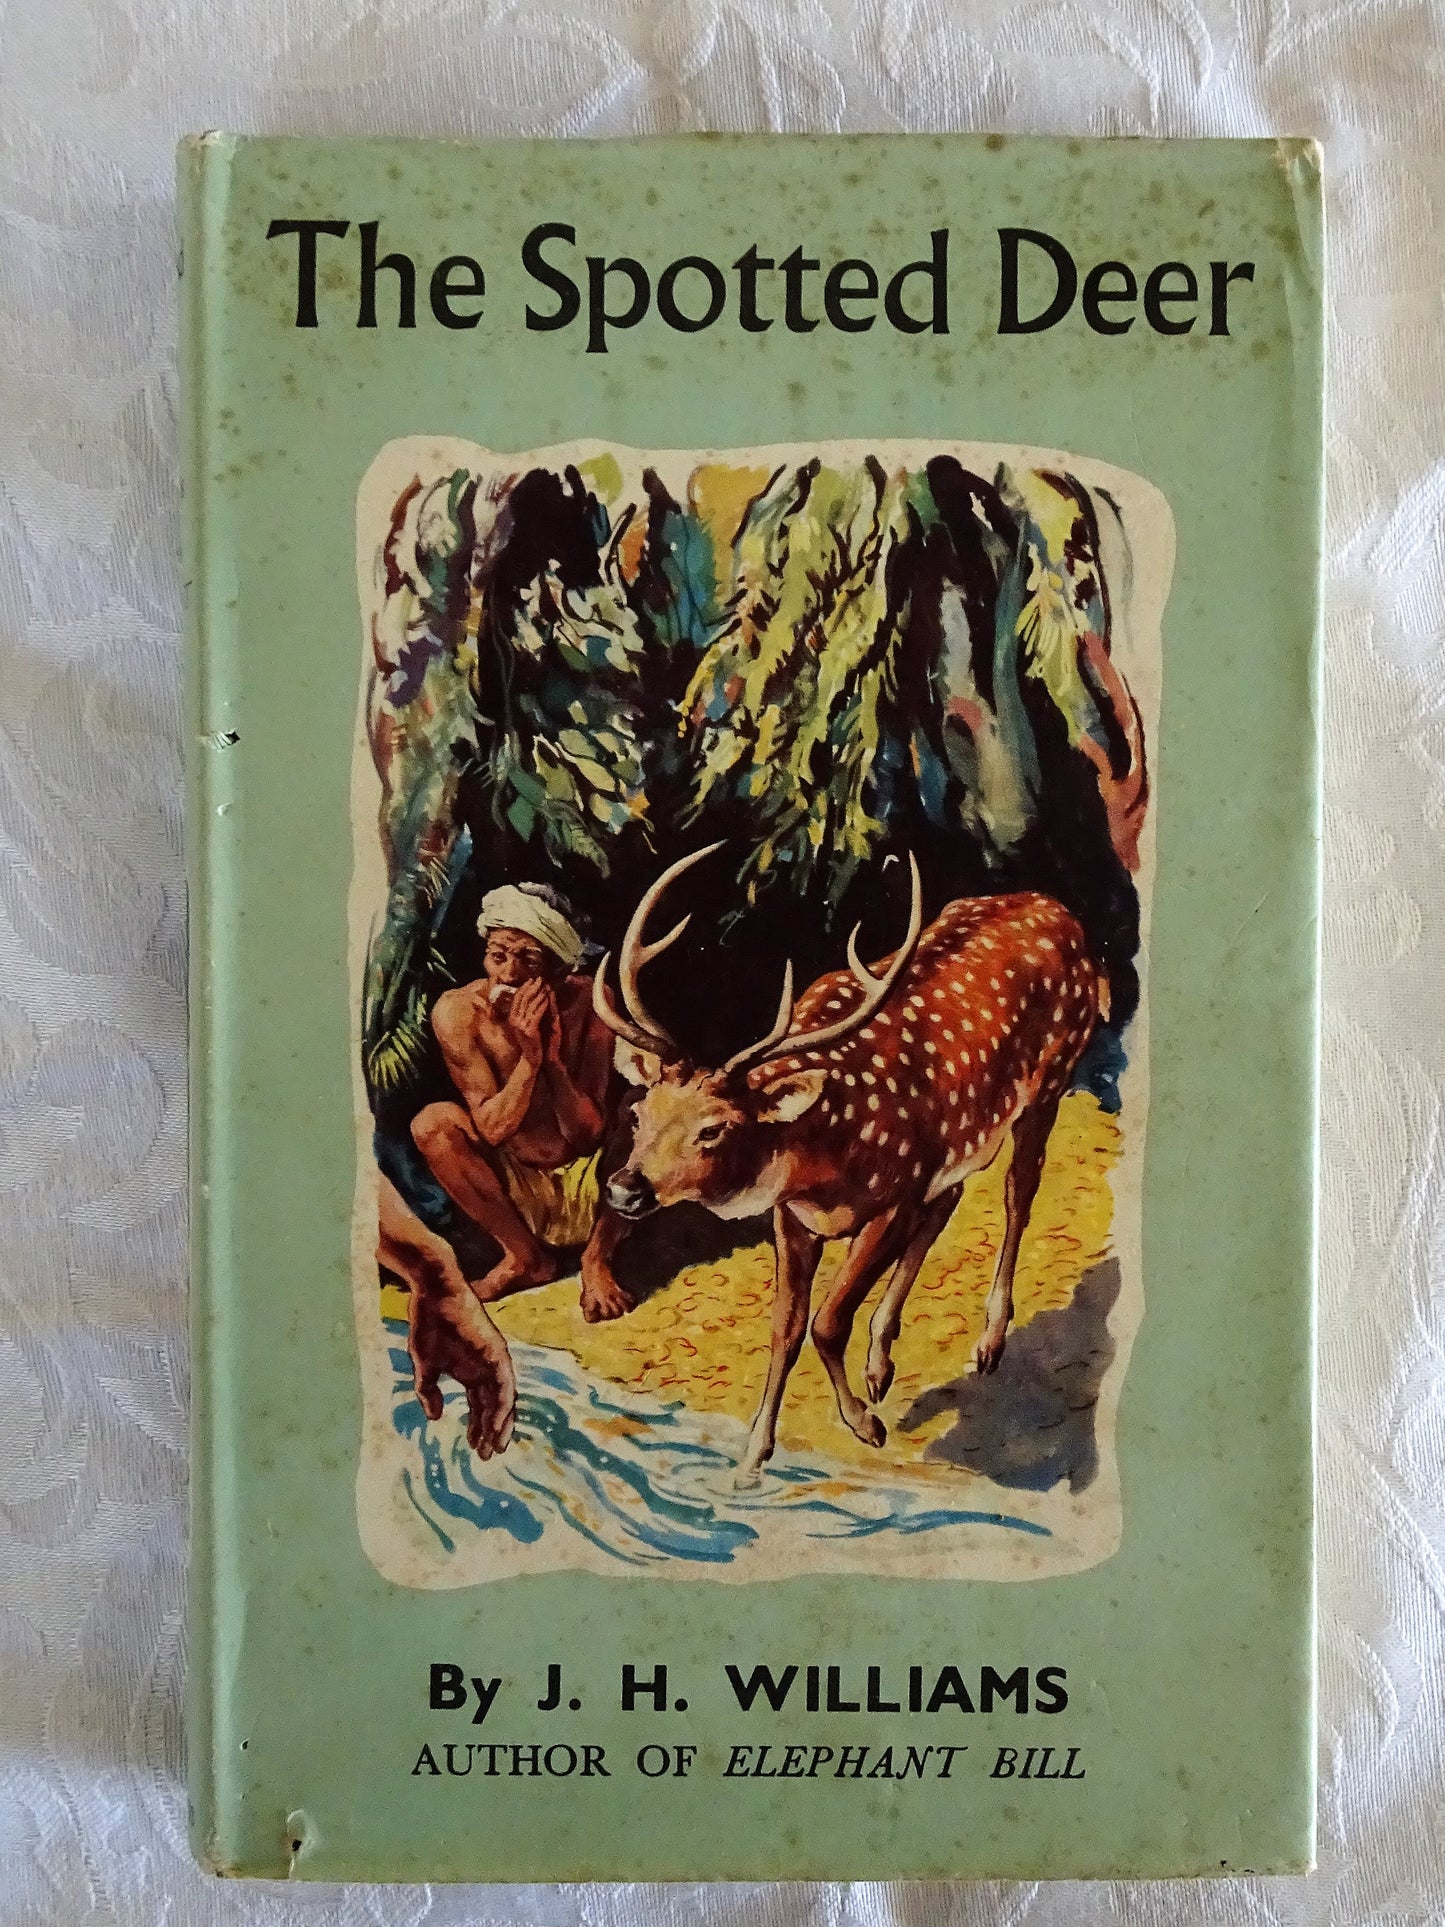 The Spotted Deer by J. H. Williams